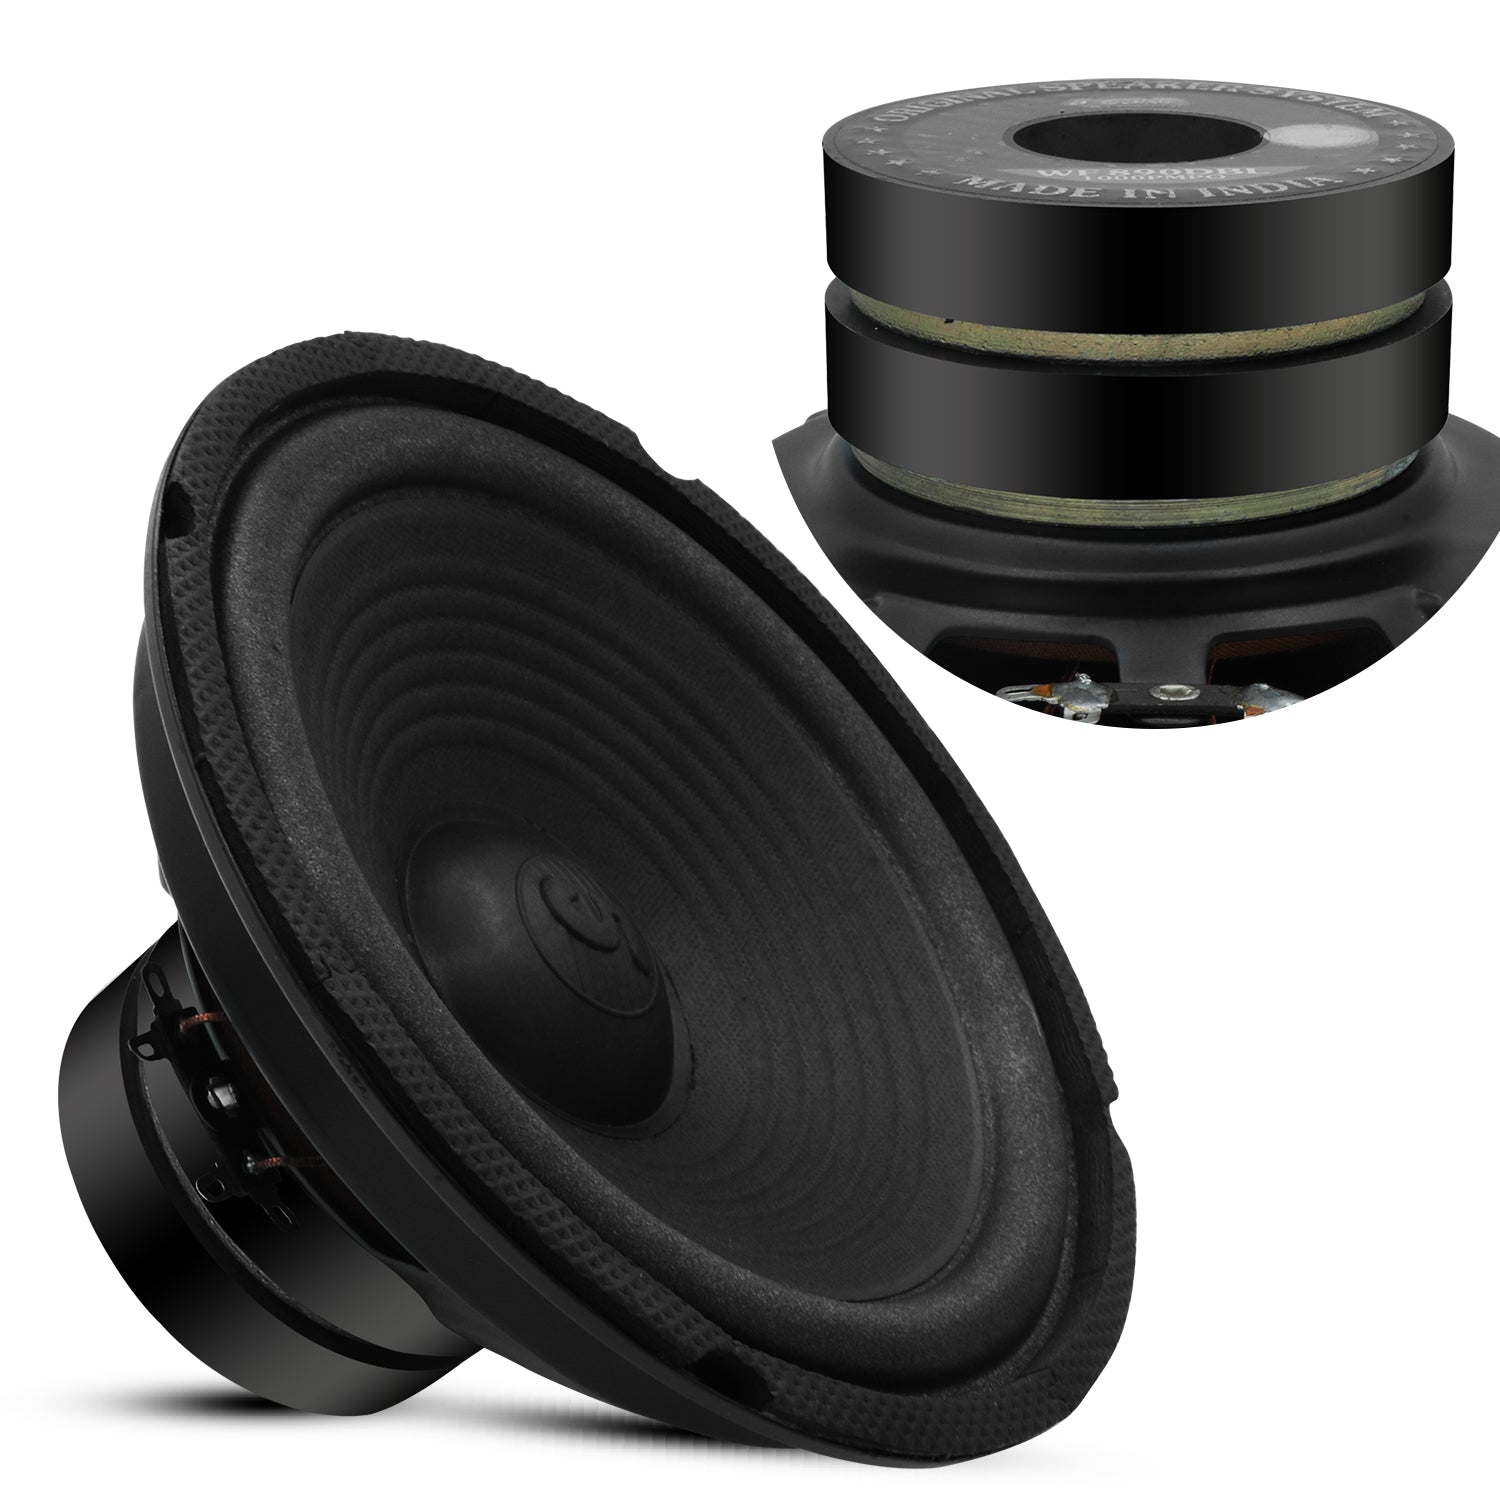 5 Core 10 Inch Subwoofer Speakers 1200W Peak 4 Ohm Replacement Car Sub Woofer w Double 13 Oz Magnet